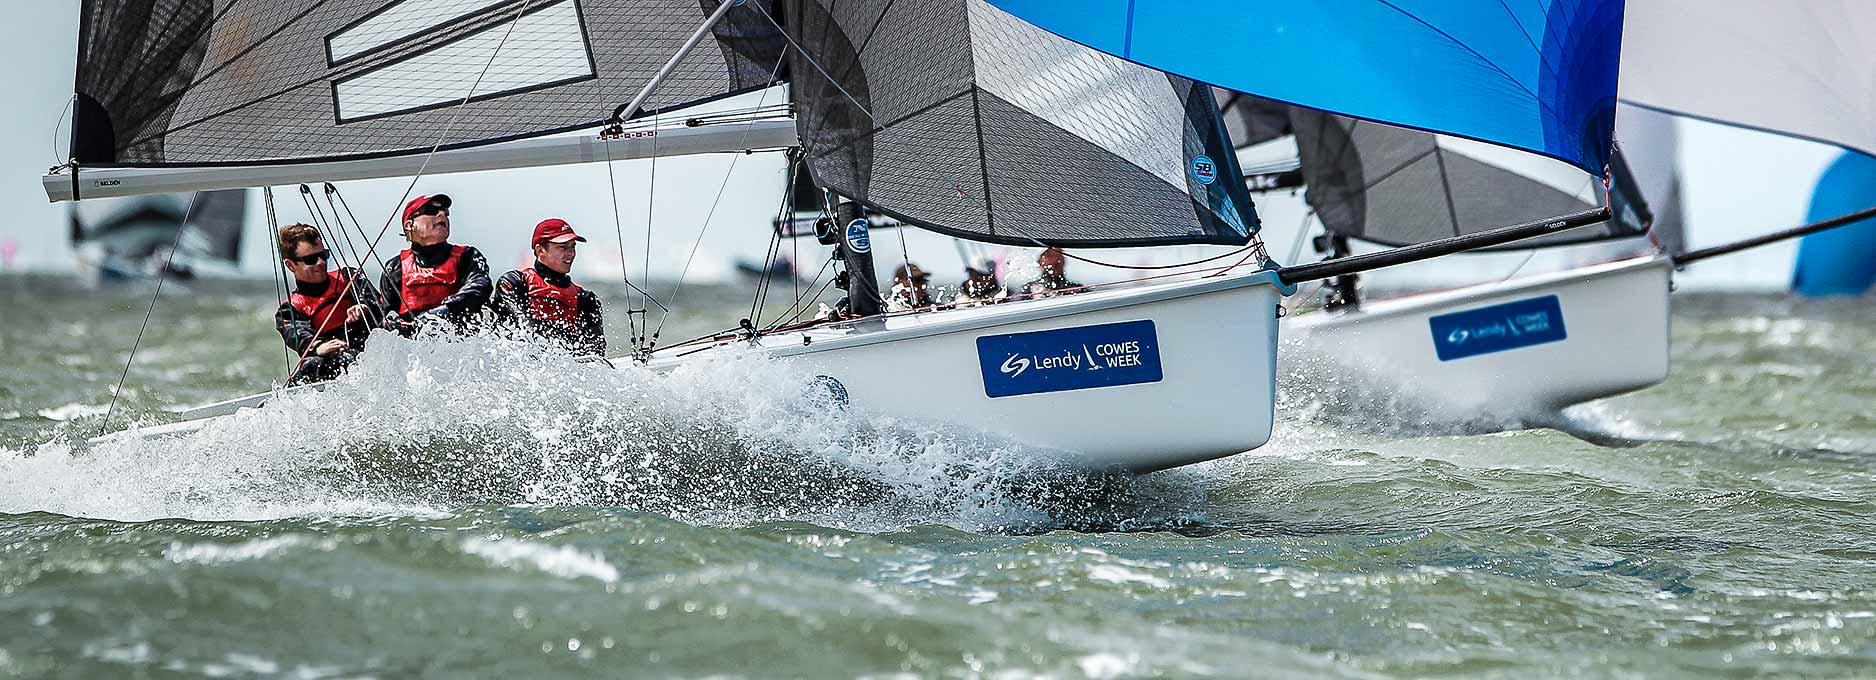 12-facts-about-lendy-cowes-week